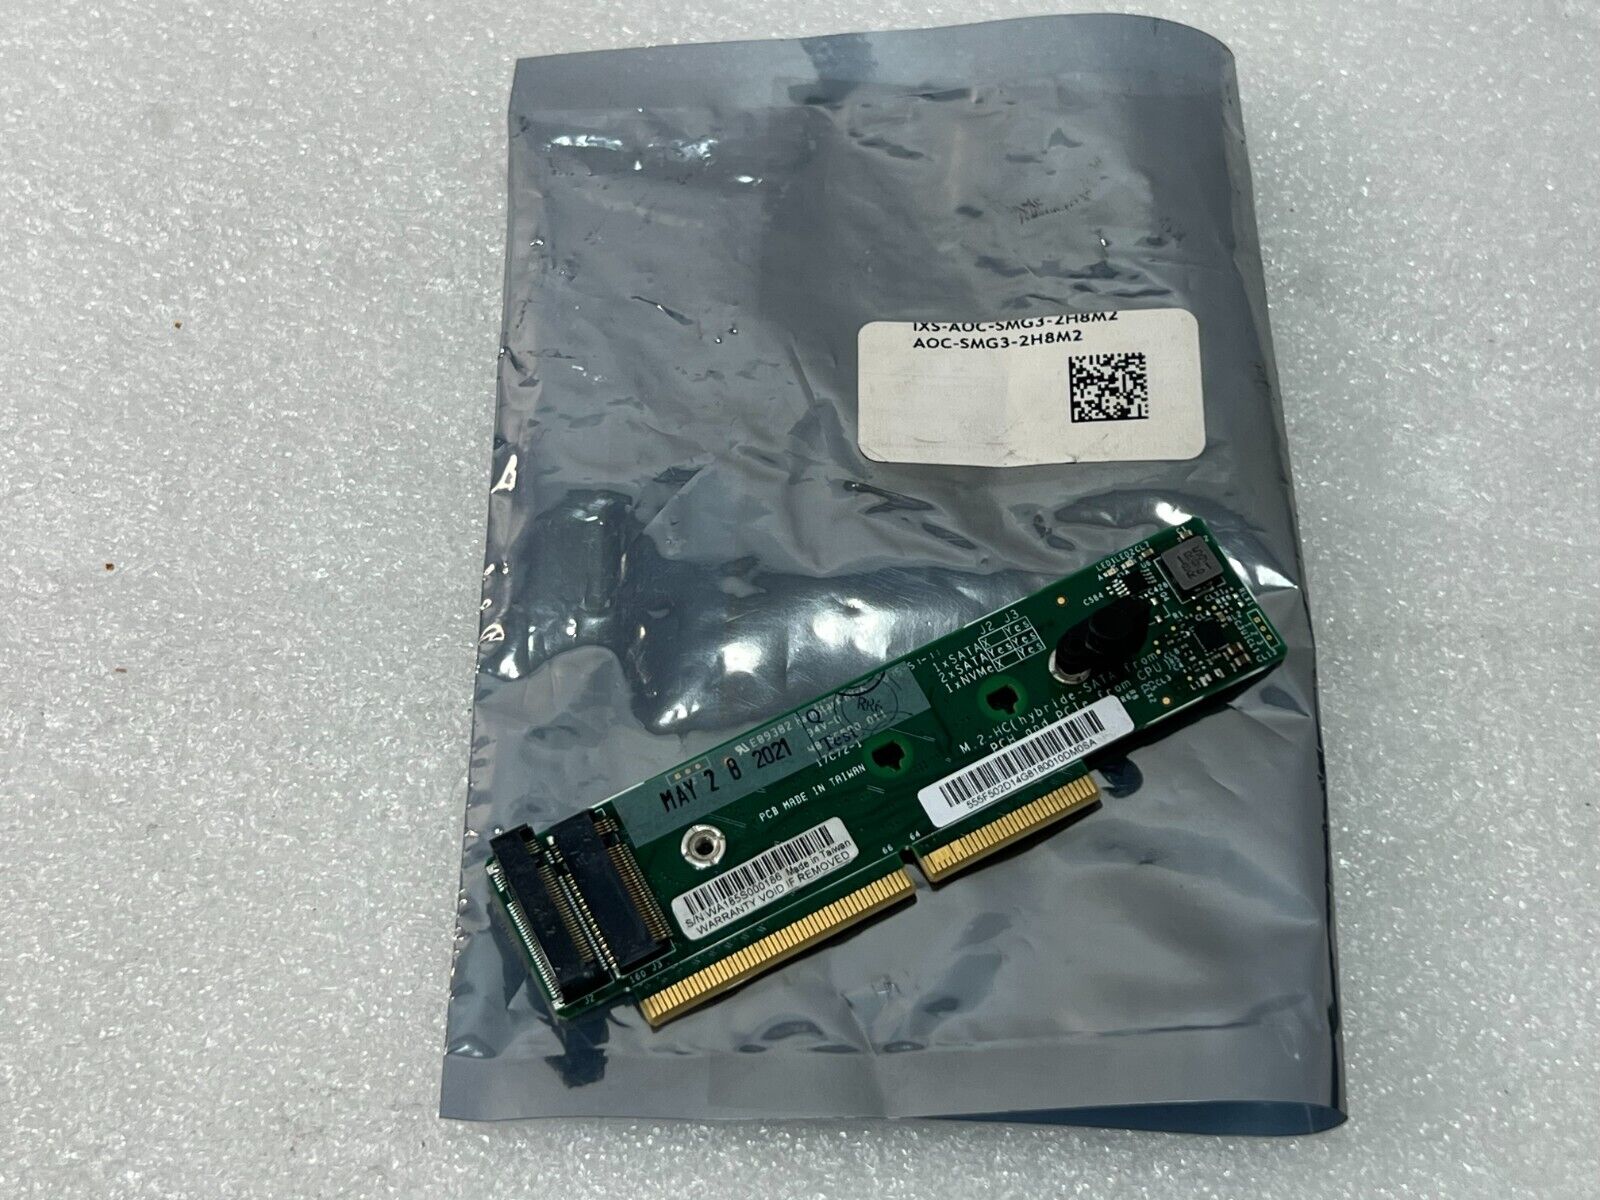 NEW Supermicro AOC-SMG3-2H8M2 2x Hybrid NVMe/SATA M.2 Carrier for Big Twin